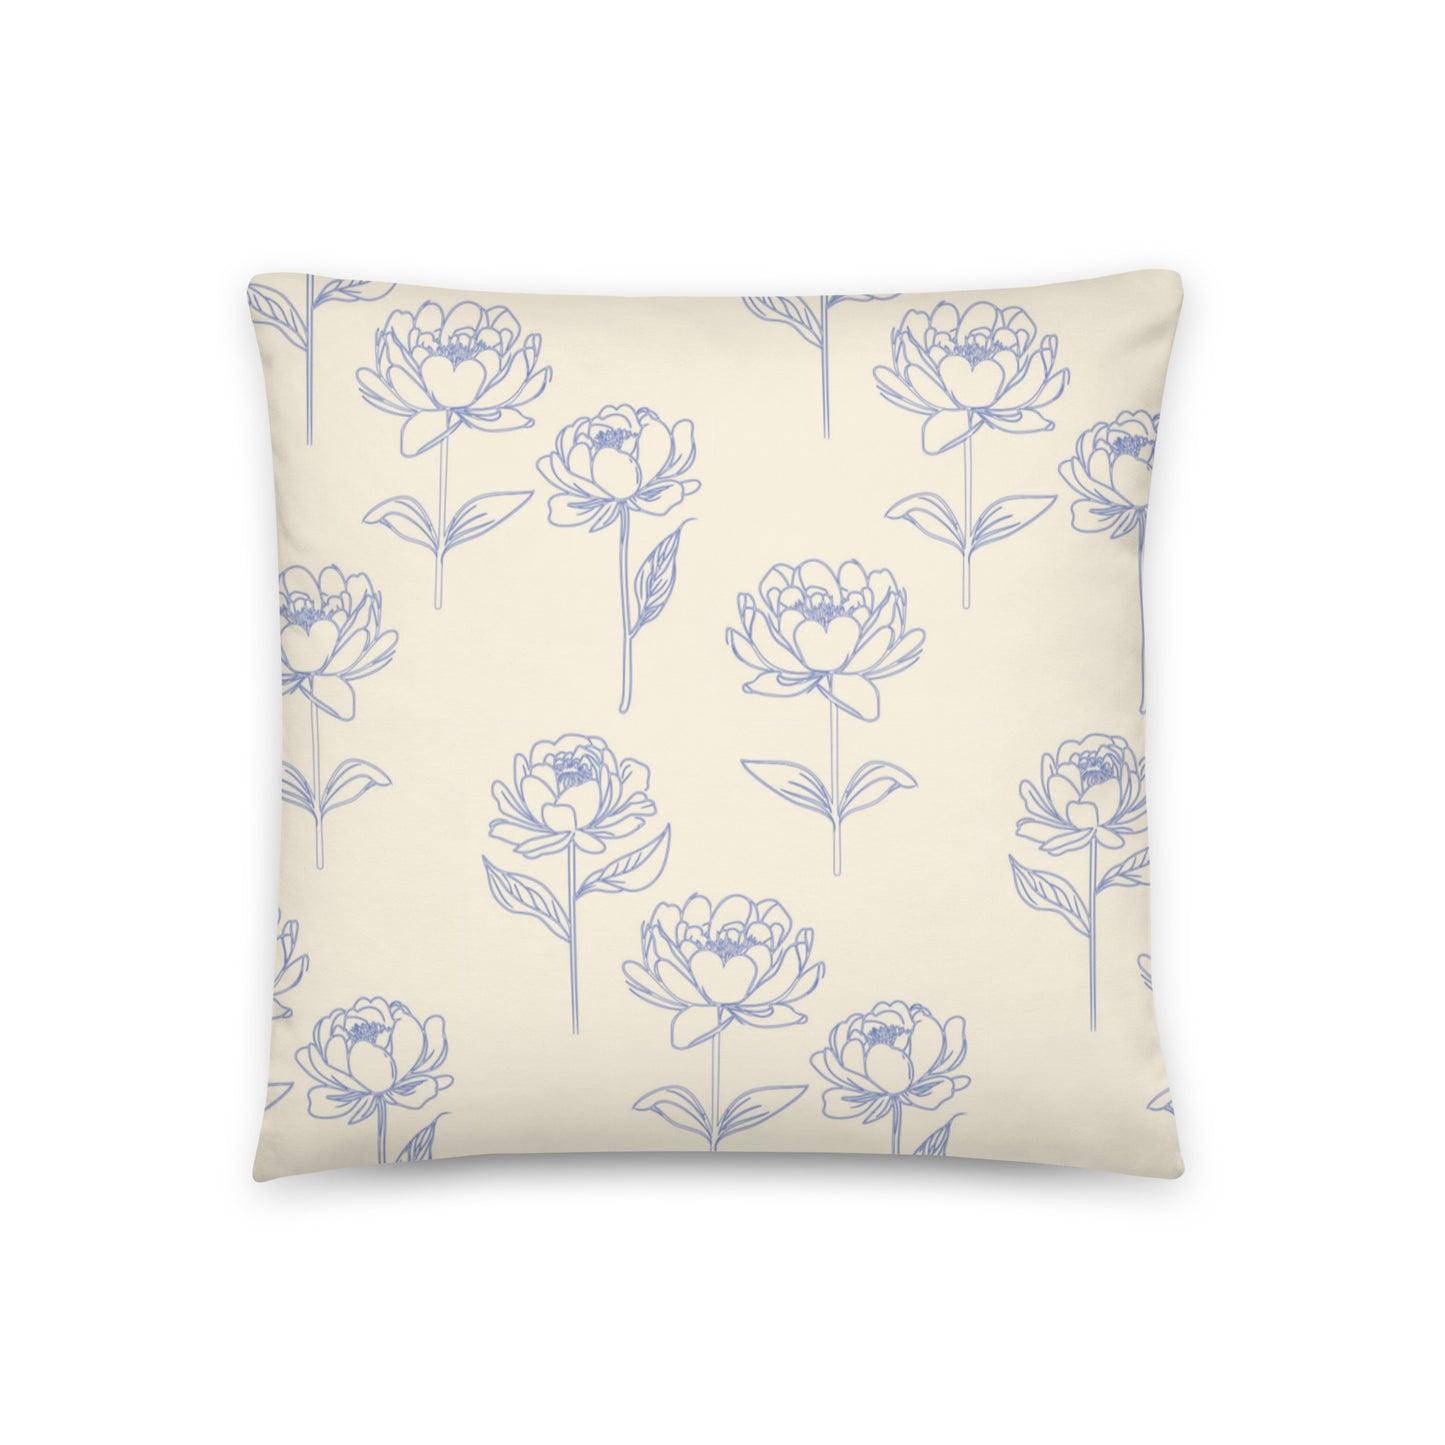 Pend Oreille Peonies Accent Pillow Cover